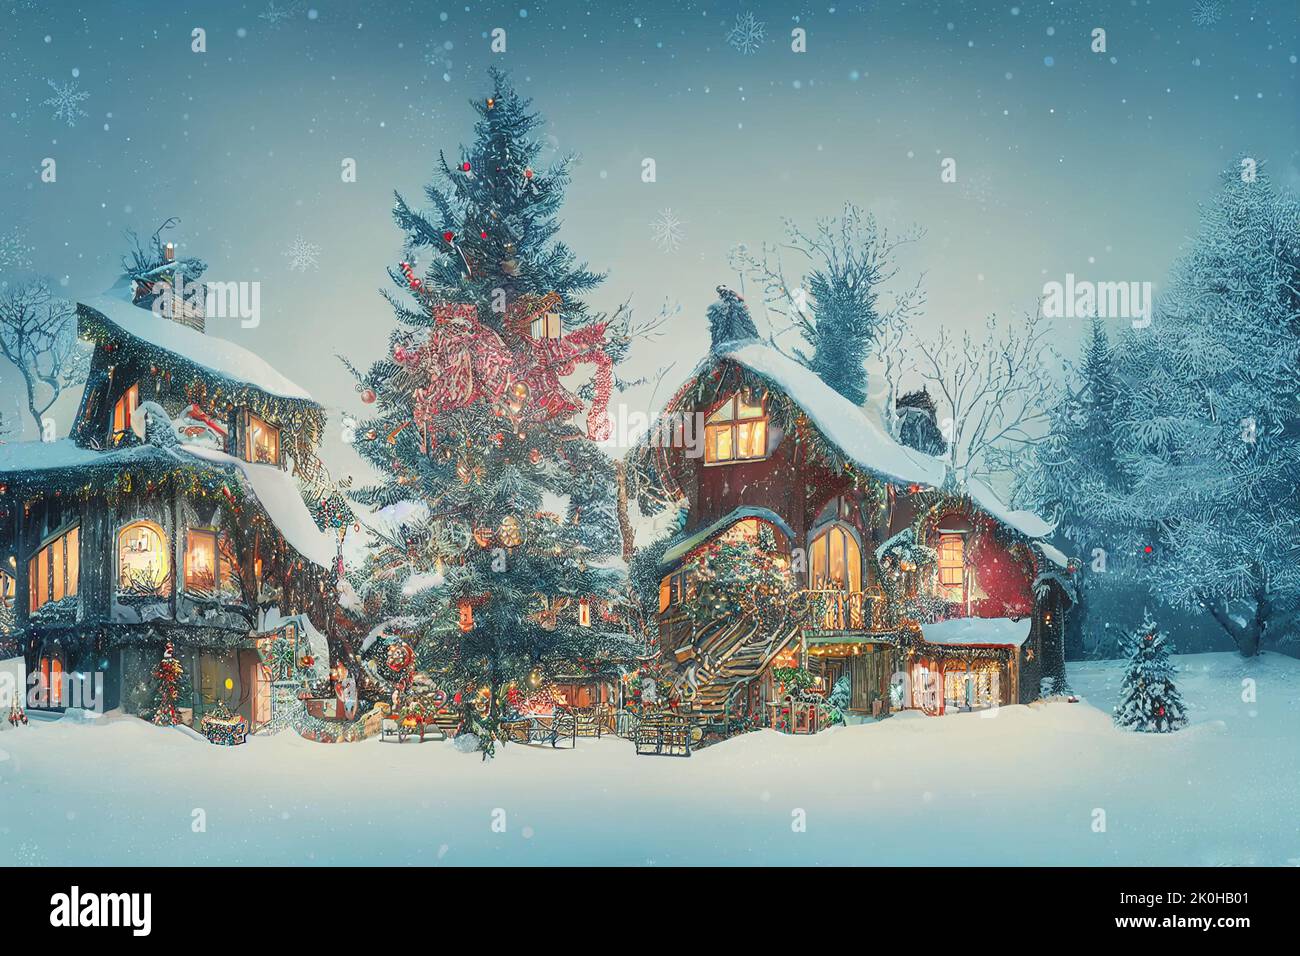 3D illustration of a Christmas tree house with ornaments and colored lights, surrounded by snow. Beautiful Wallpaper Stock Photo